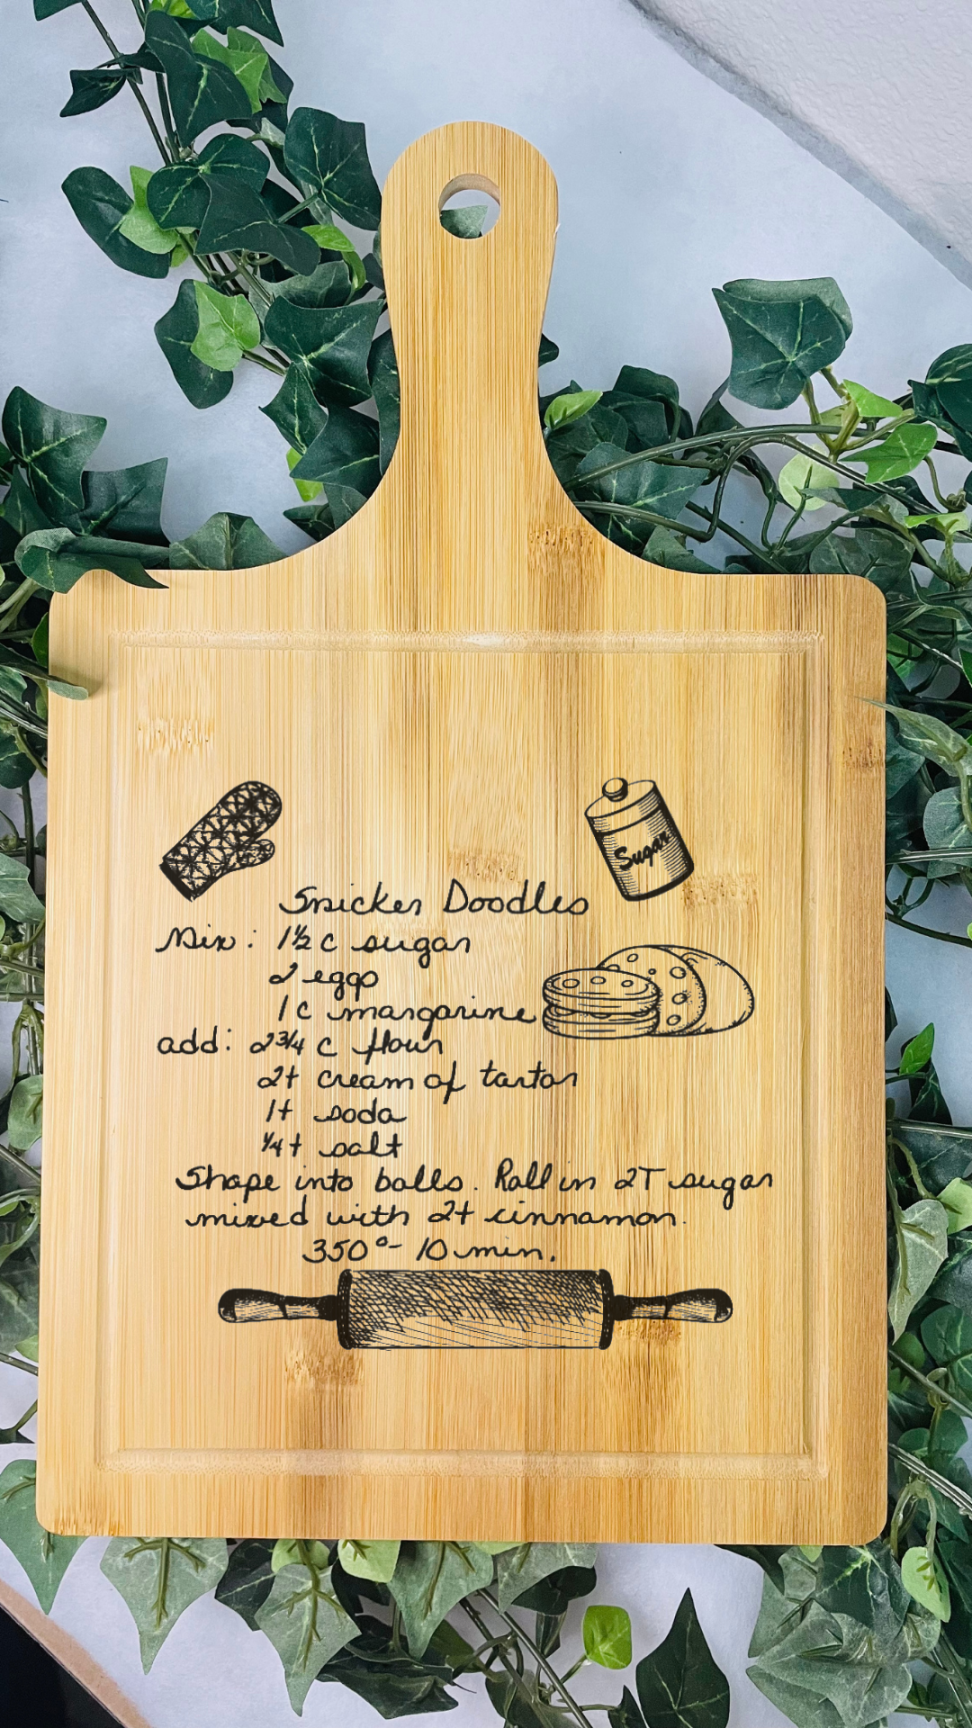 Buy Laser engraved bamboo cutting board with custom design, size